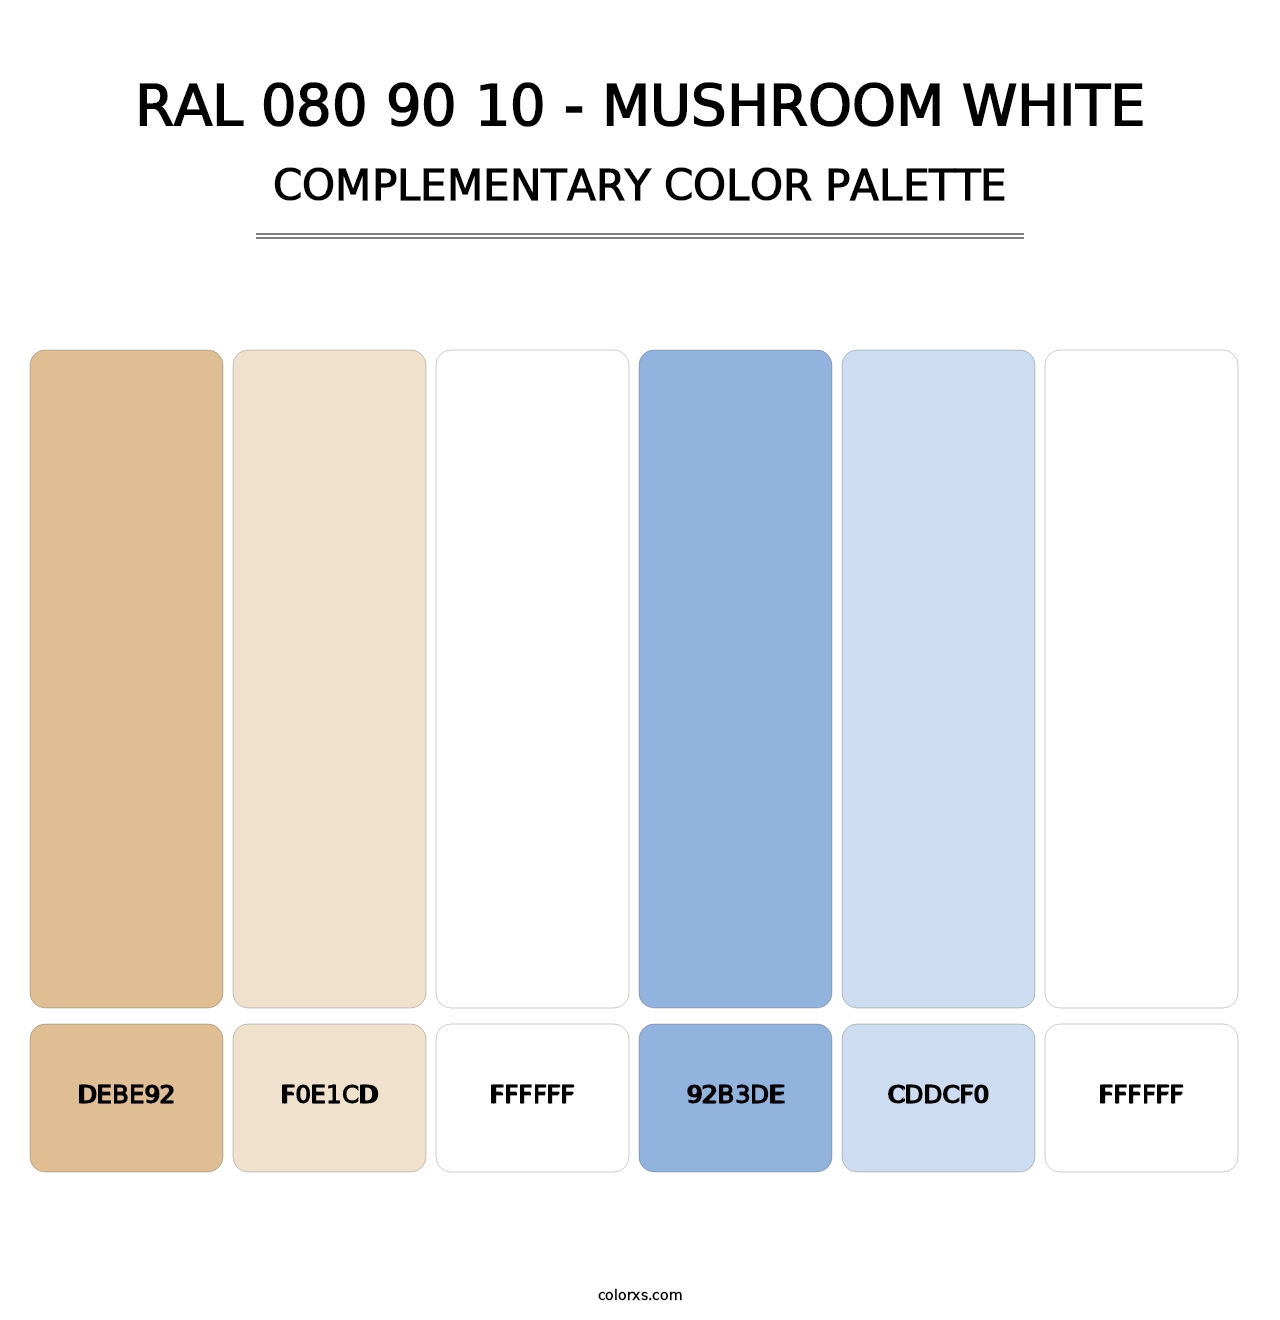 RAL 080 90 10 - Mushroom White - Complementary Color Palette